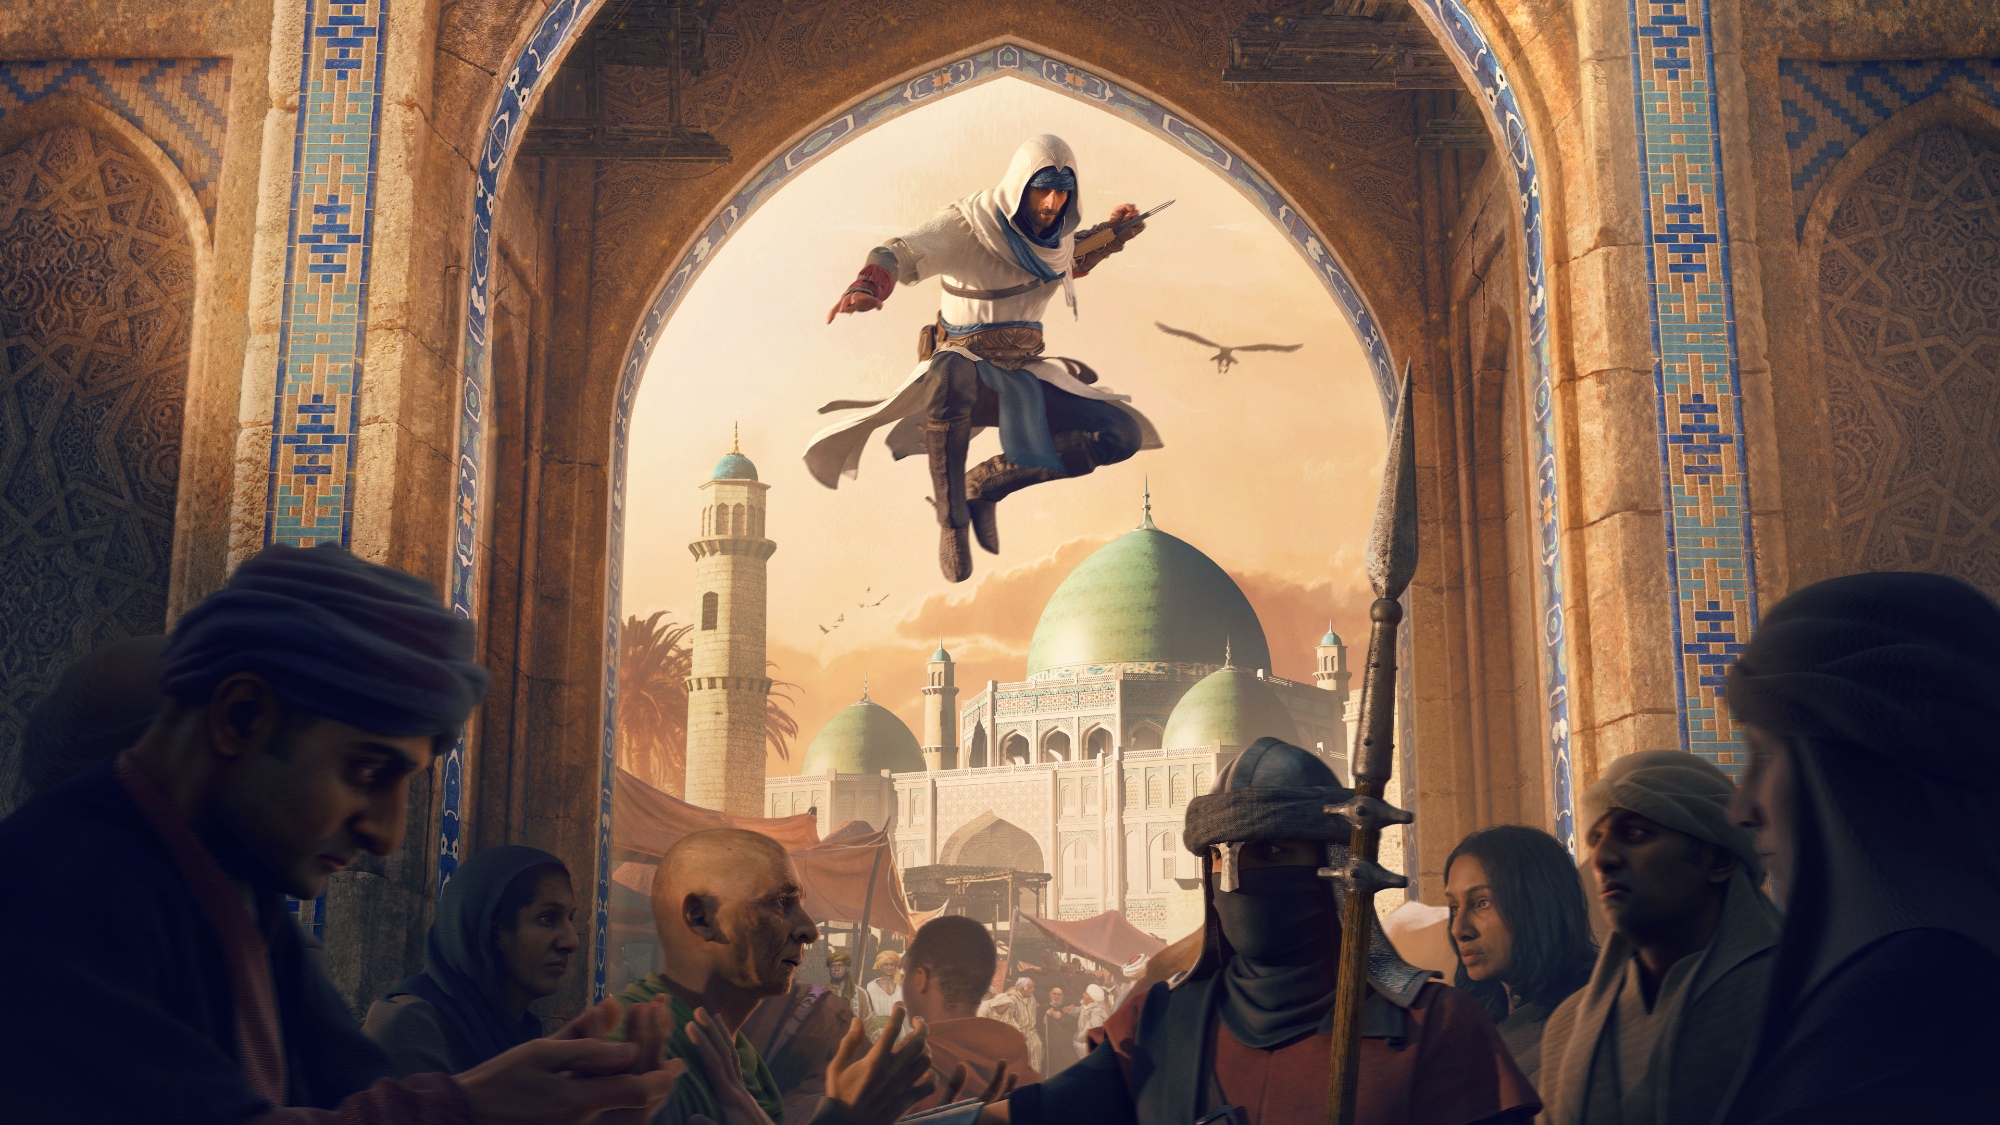 Assassin's Creed Mirage™ Gameplay is Cut Down 